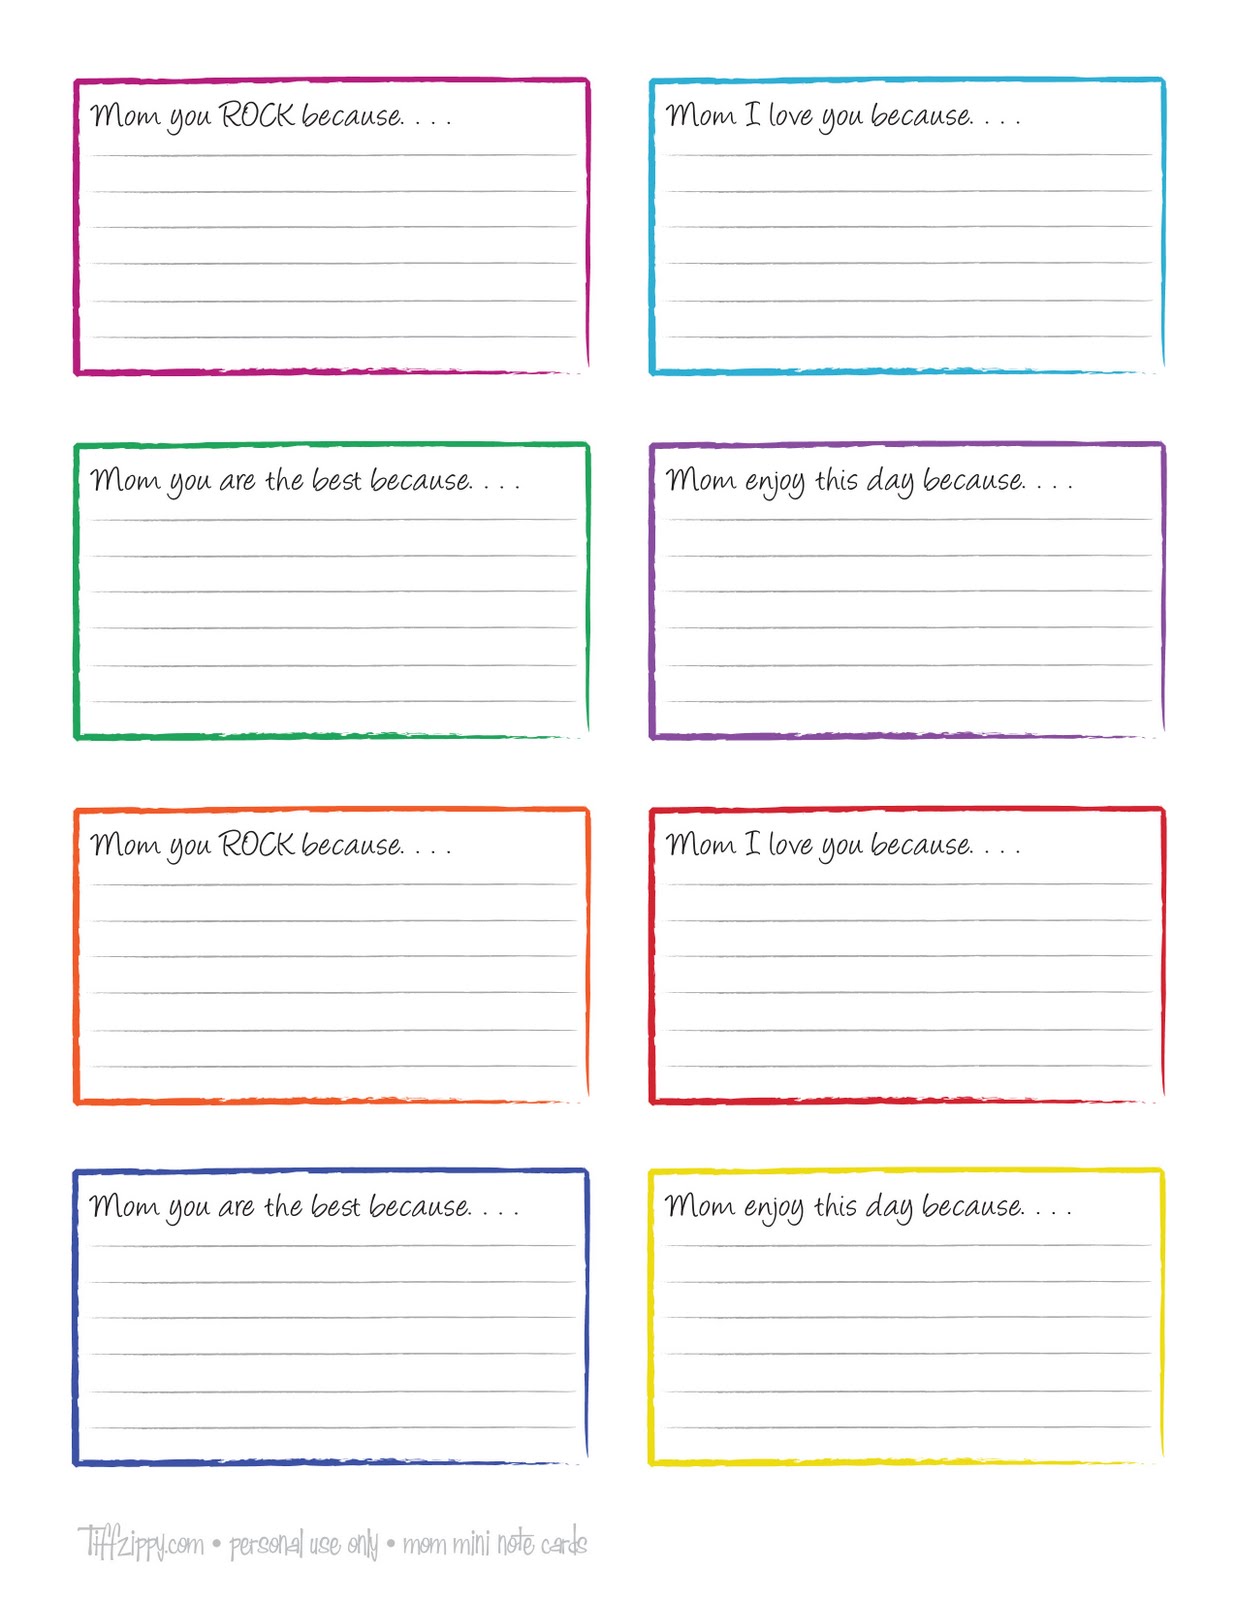 17 Free Note Card Designs Images   Note Card Templates Free, Free 